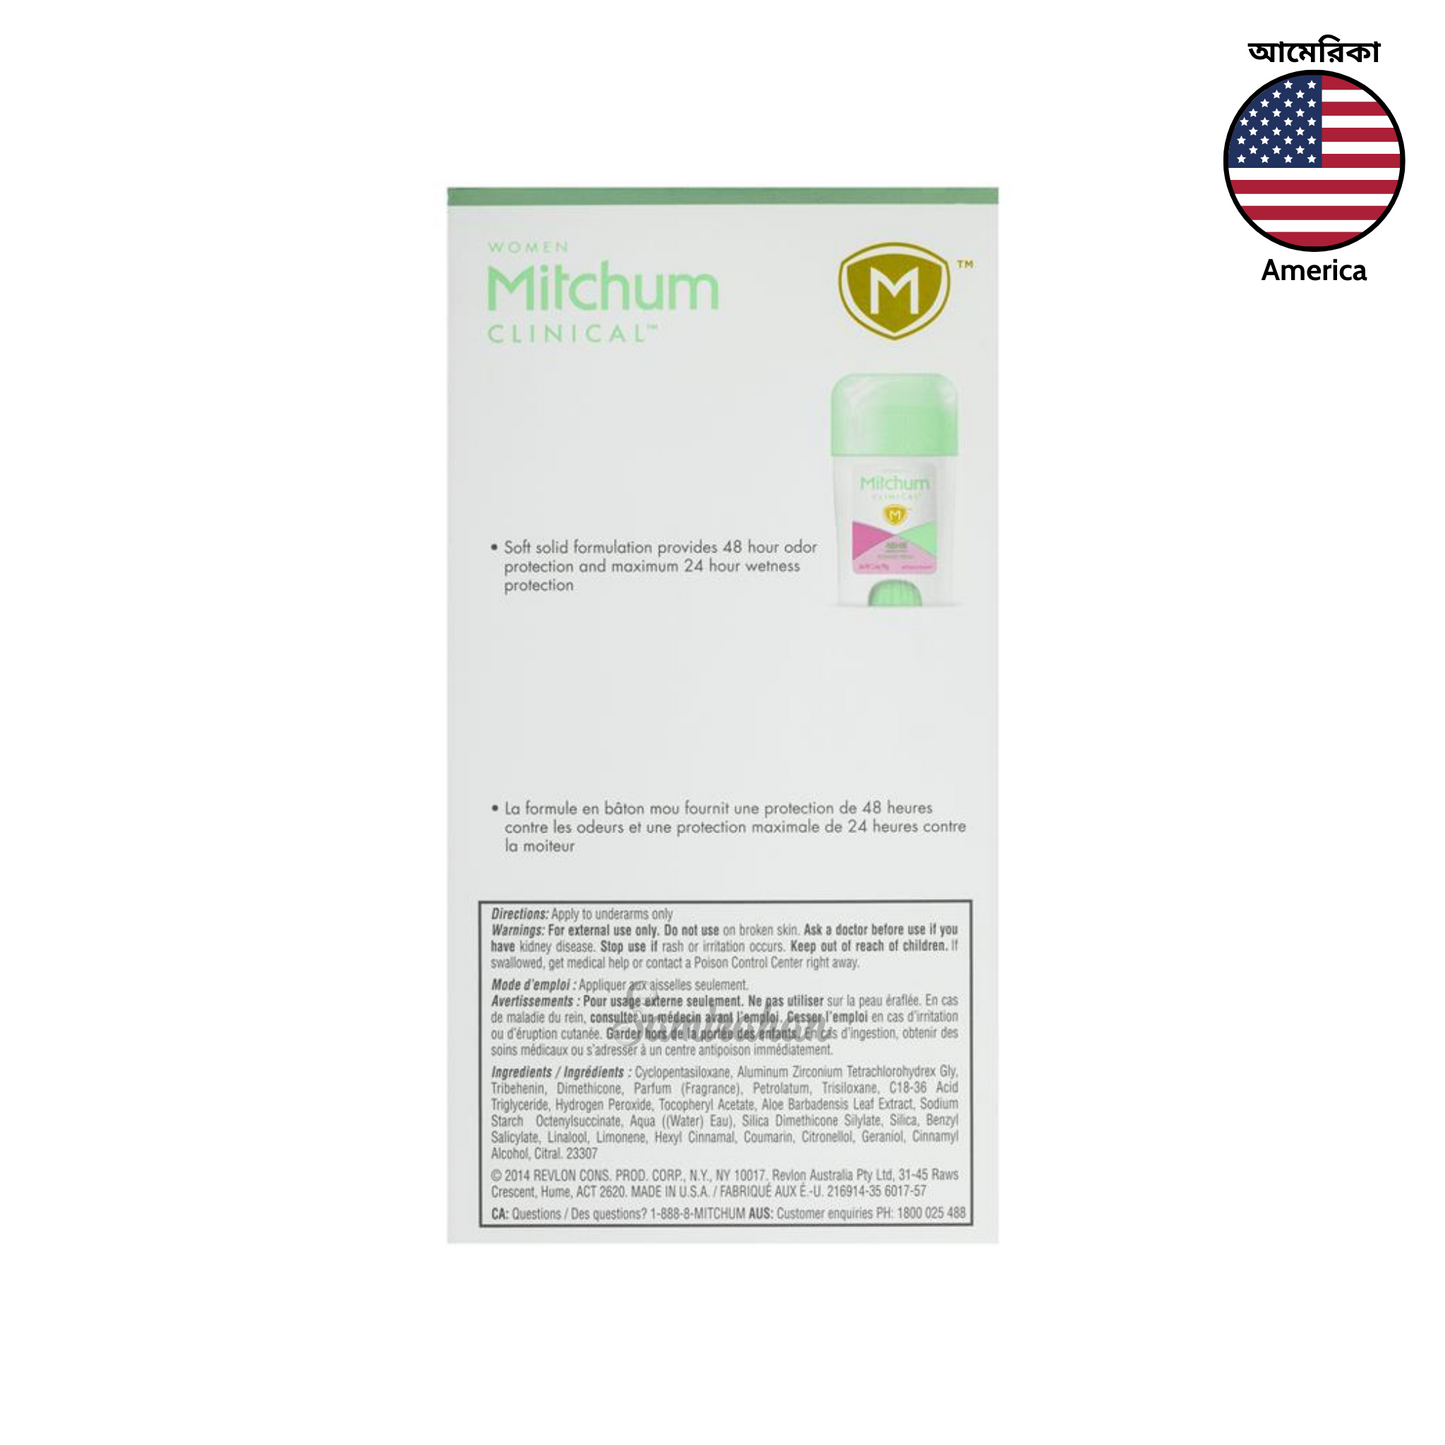 Mitchum Women Clinical Soft Solid Deodorant Powder Fresh provides reliable protection from sweat odor, keeps you dry & comfortable. Best imported foreign authentic genuine real original Australian American USA premium brand quality luxury women's female gf girlfriend wife gift idea price in Dhaka Chittagong Bangladesh.